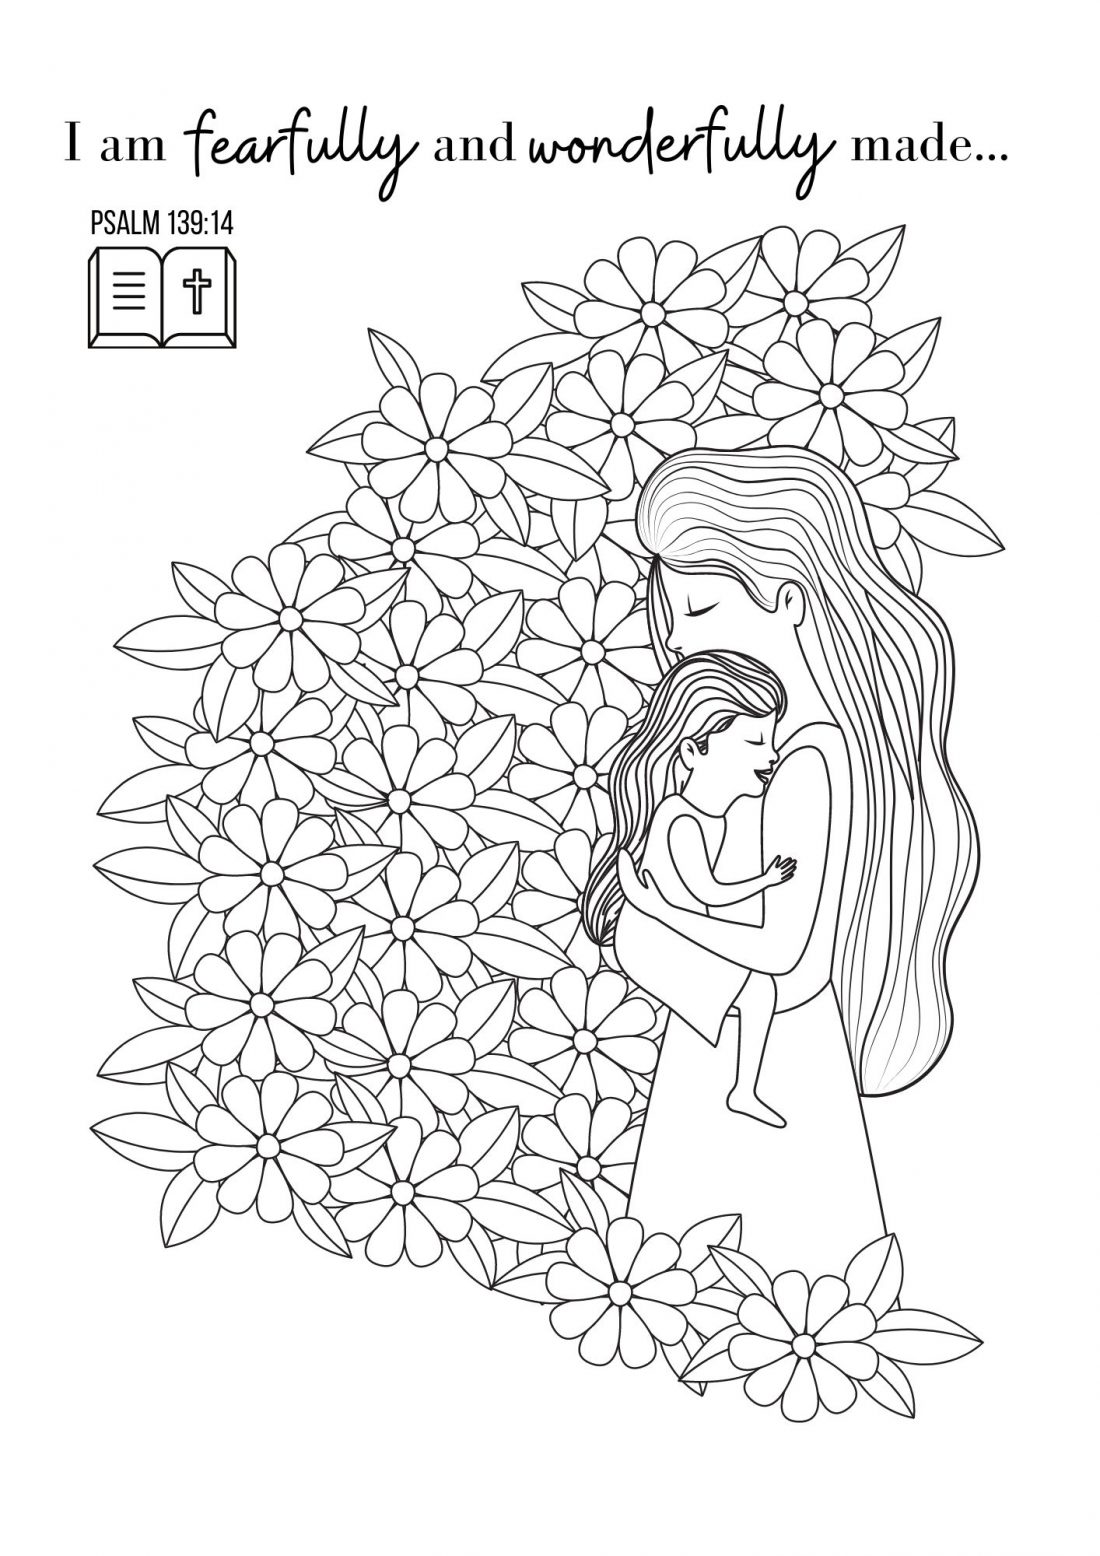 Fearfully and Wonderfully Made Bible Coloring Page (Mother and Daughter) Scripture focus: "I am fearfully and wonderfully made..." Psalm 139:14